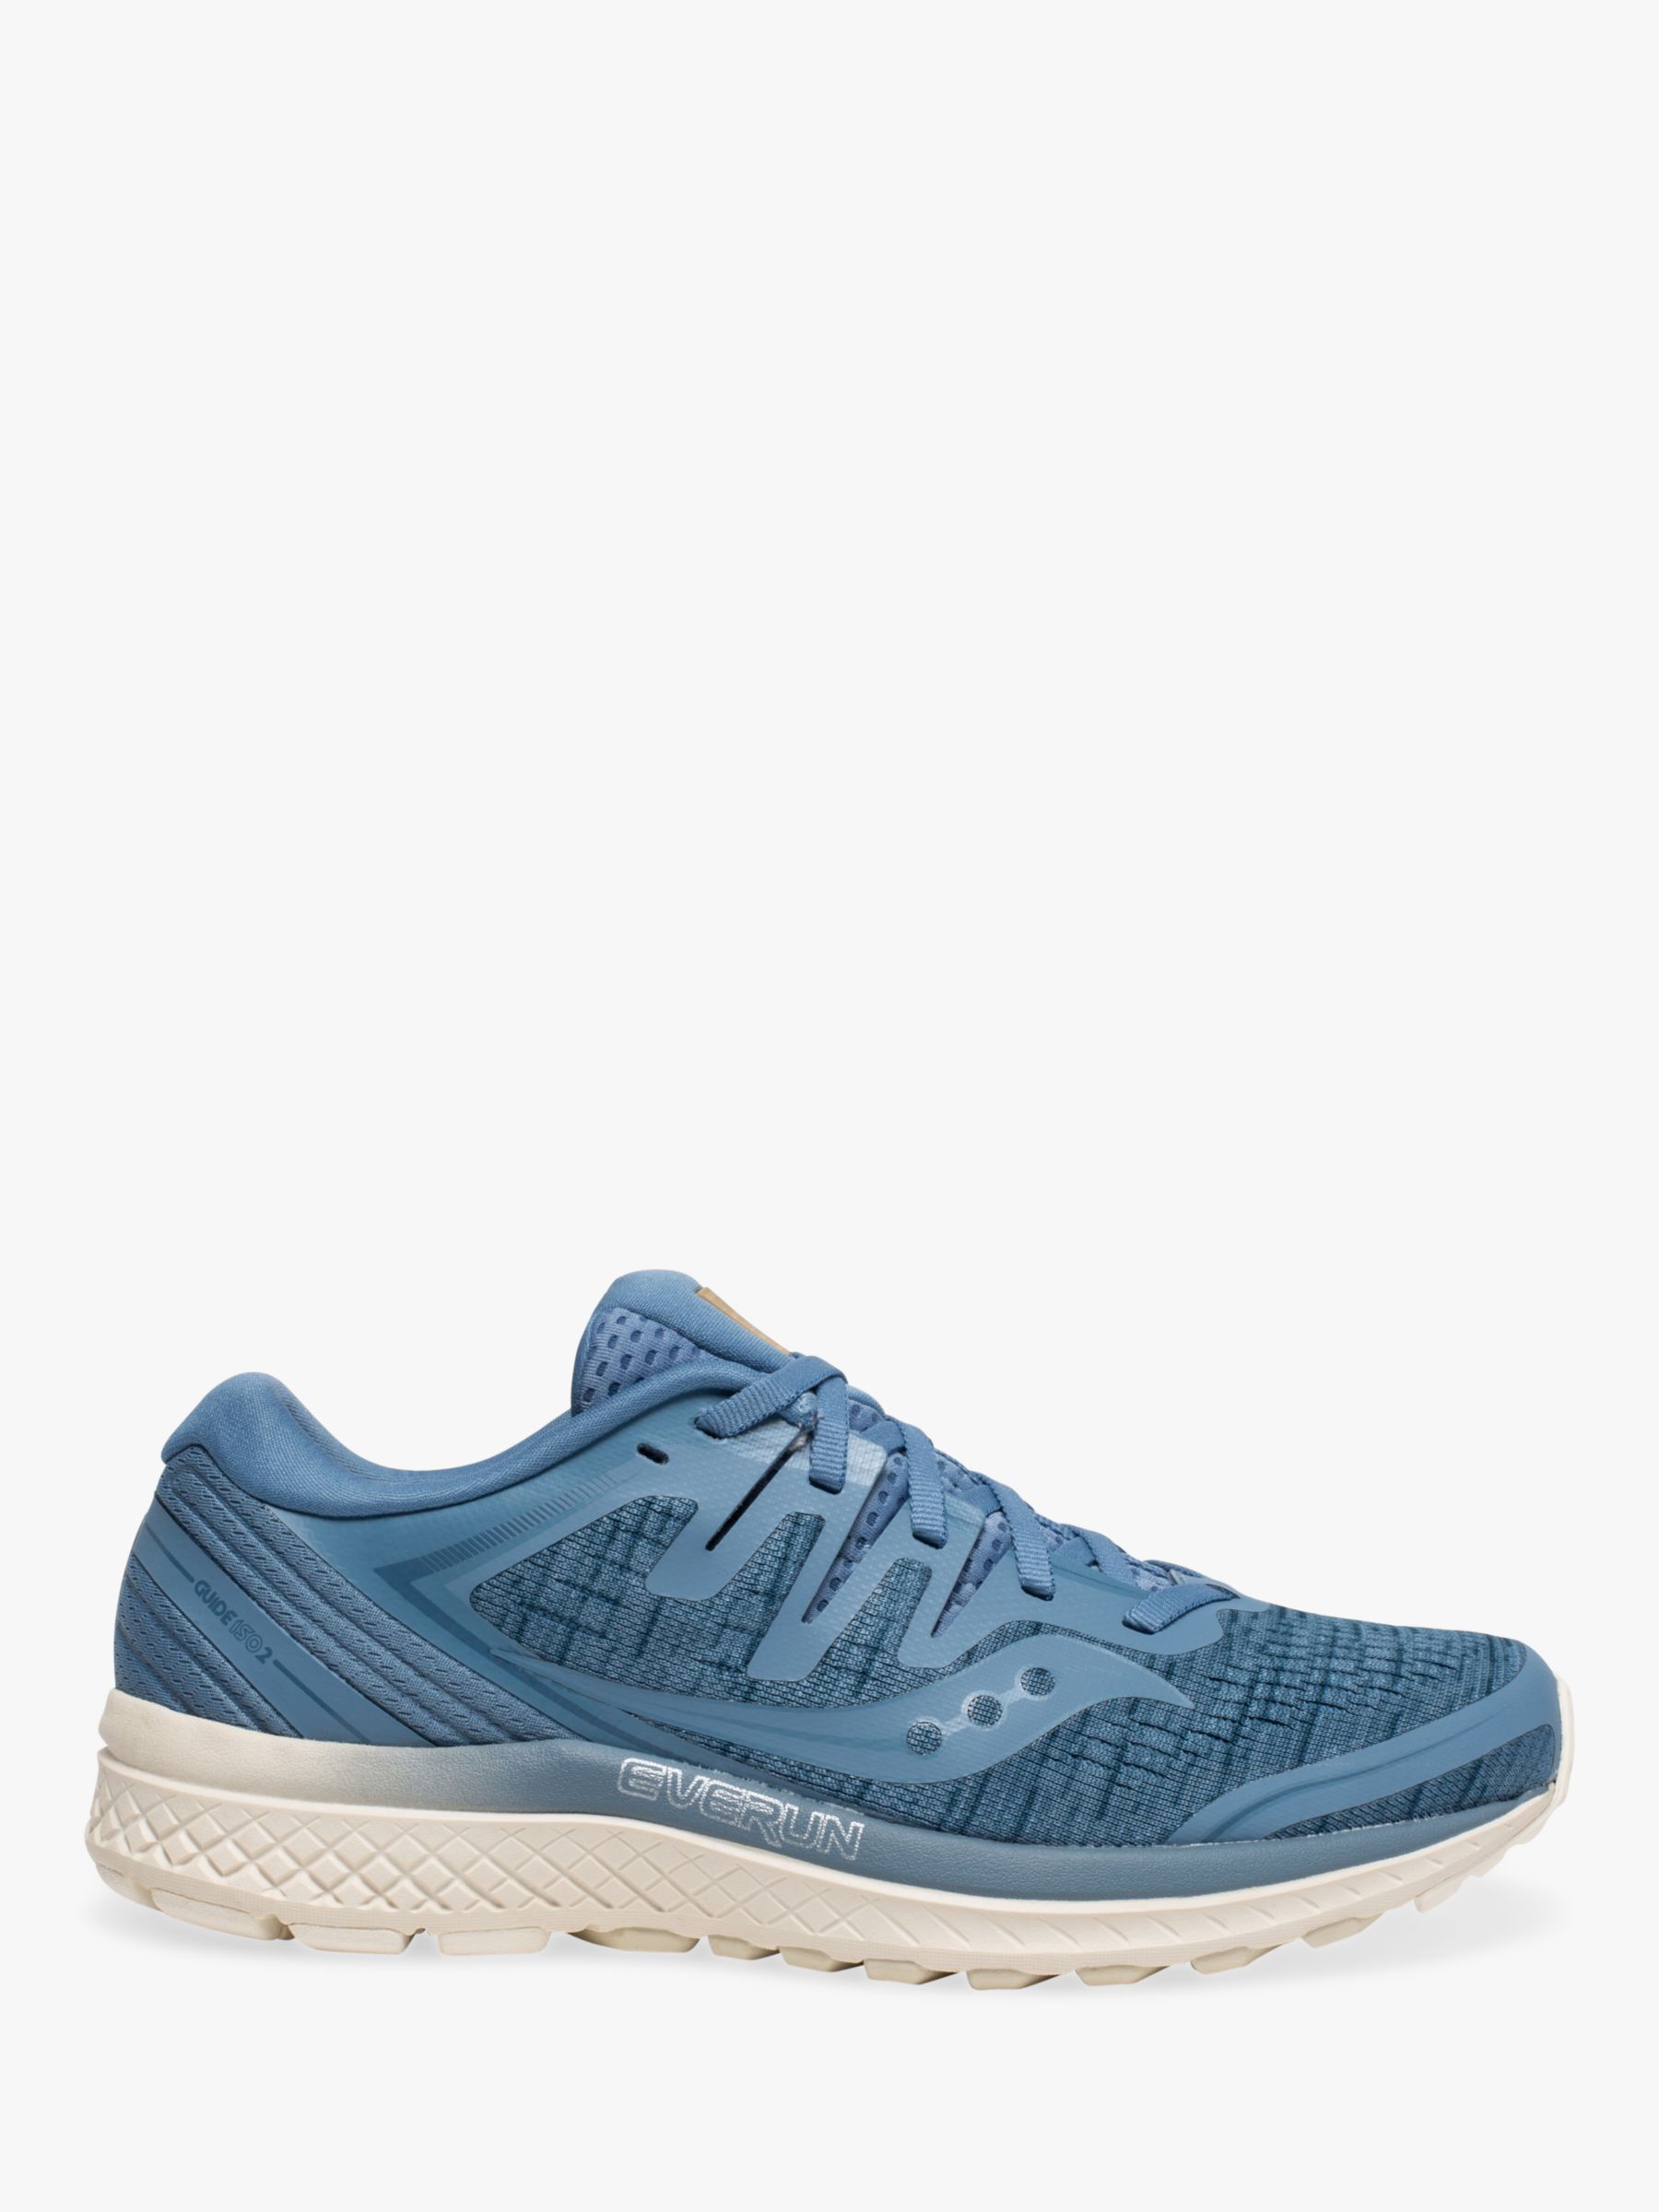 saucony guide iso 2 womens uk